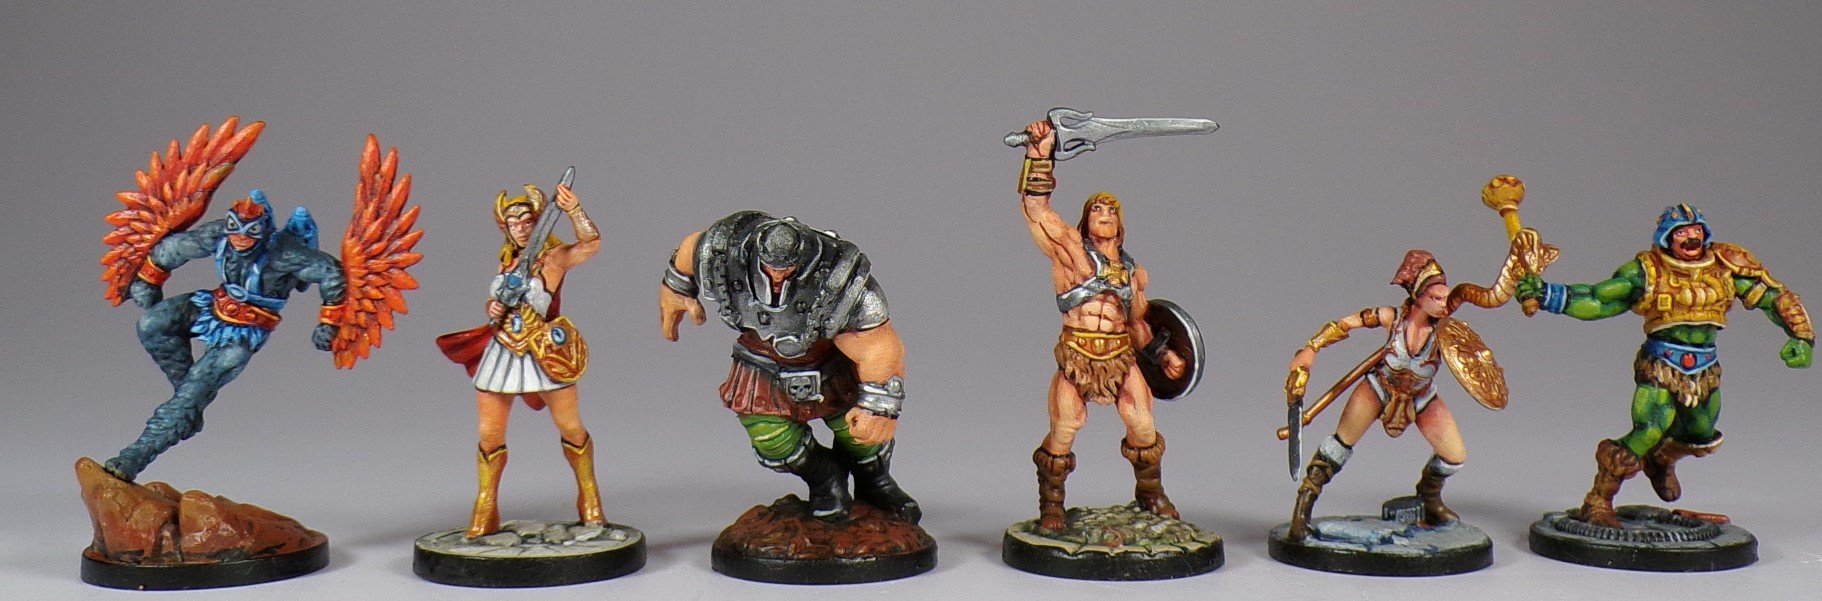 Paintedfigs Masters of the Universe Clash for Eternia miniature painting service (39).jpg